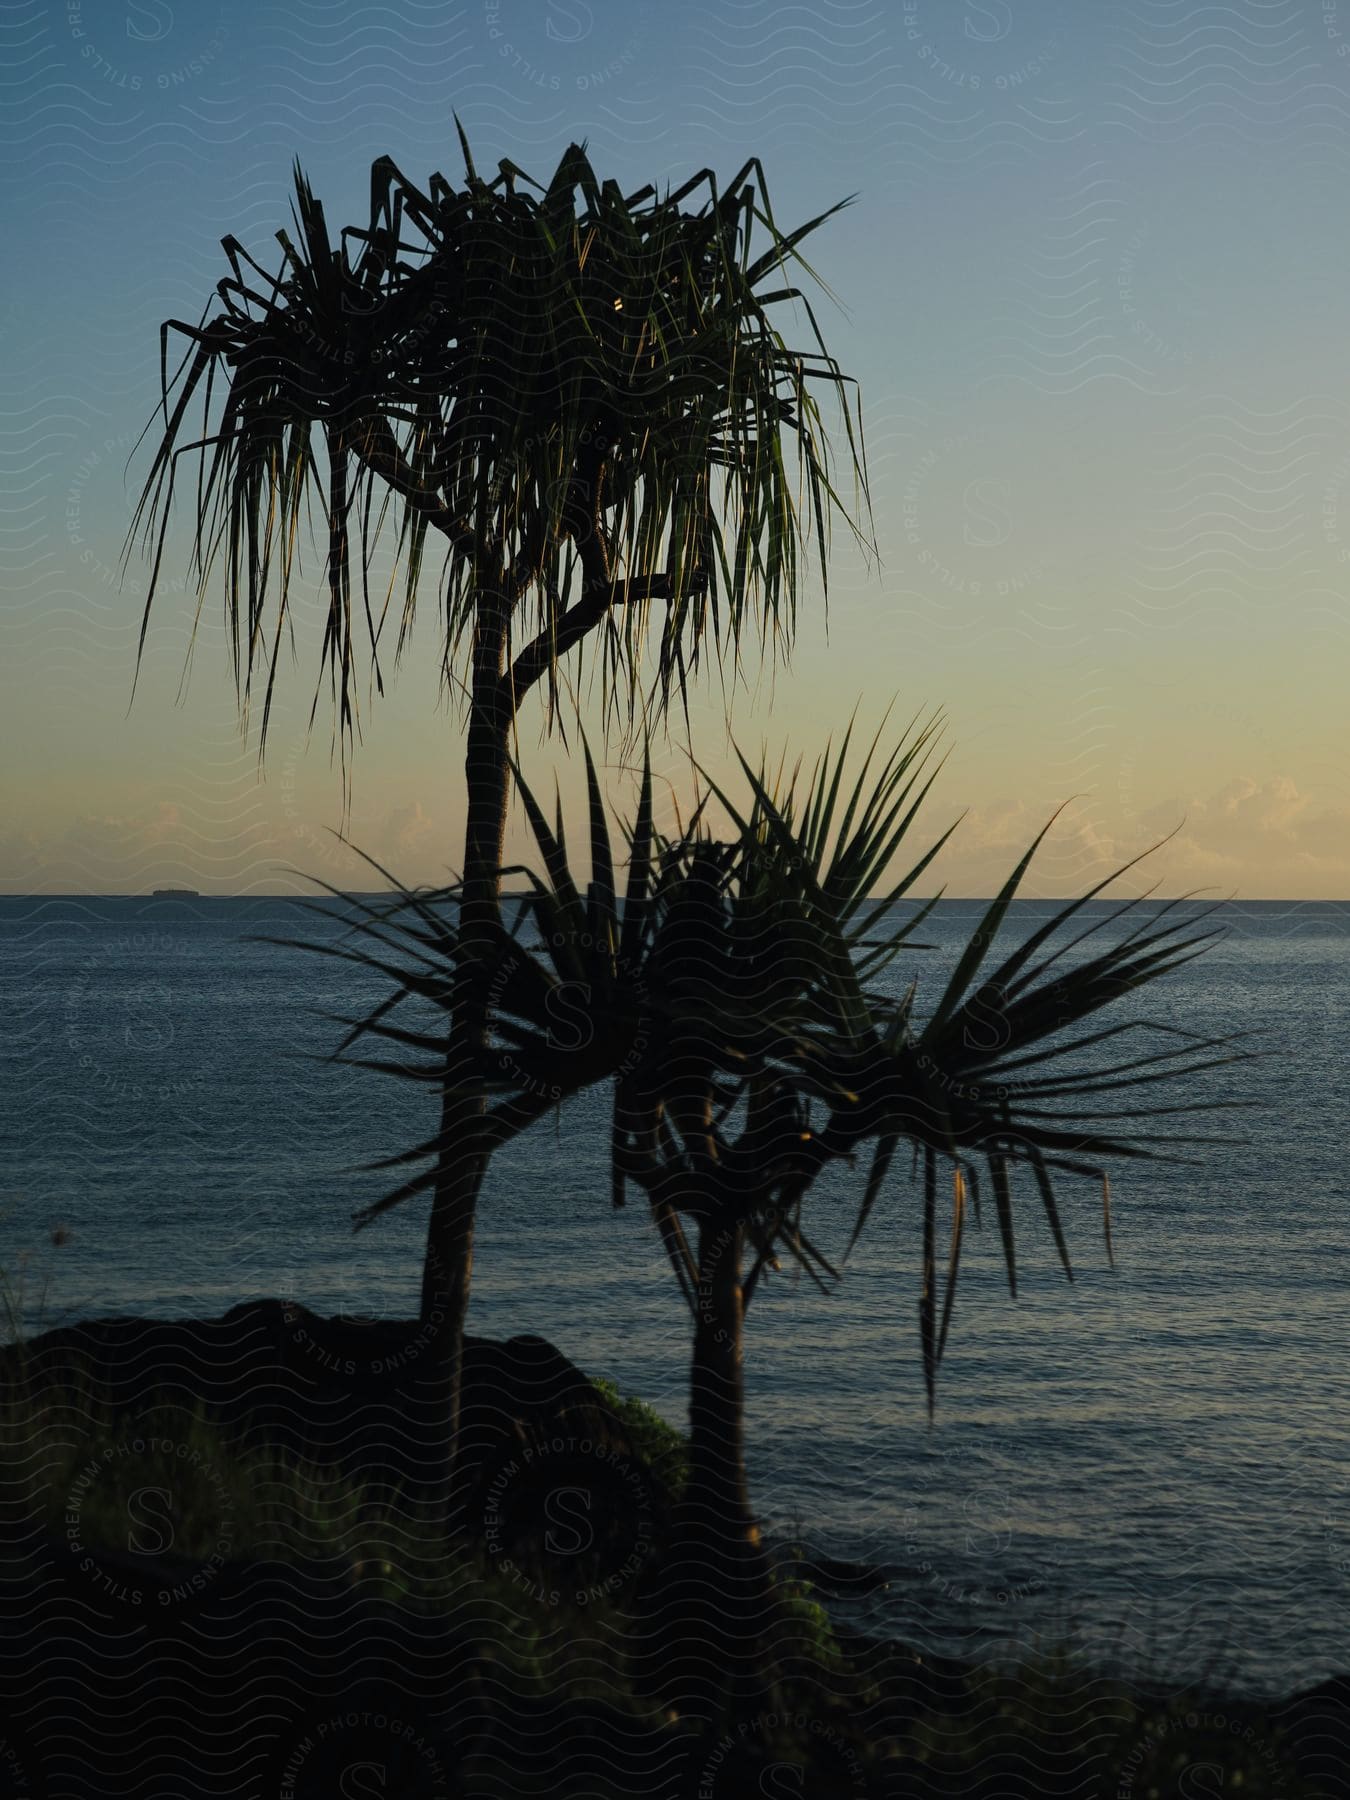 Palm trees stand along the coast at dusk